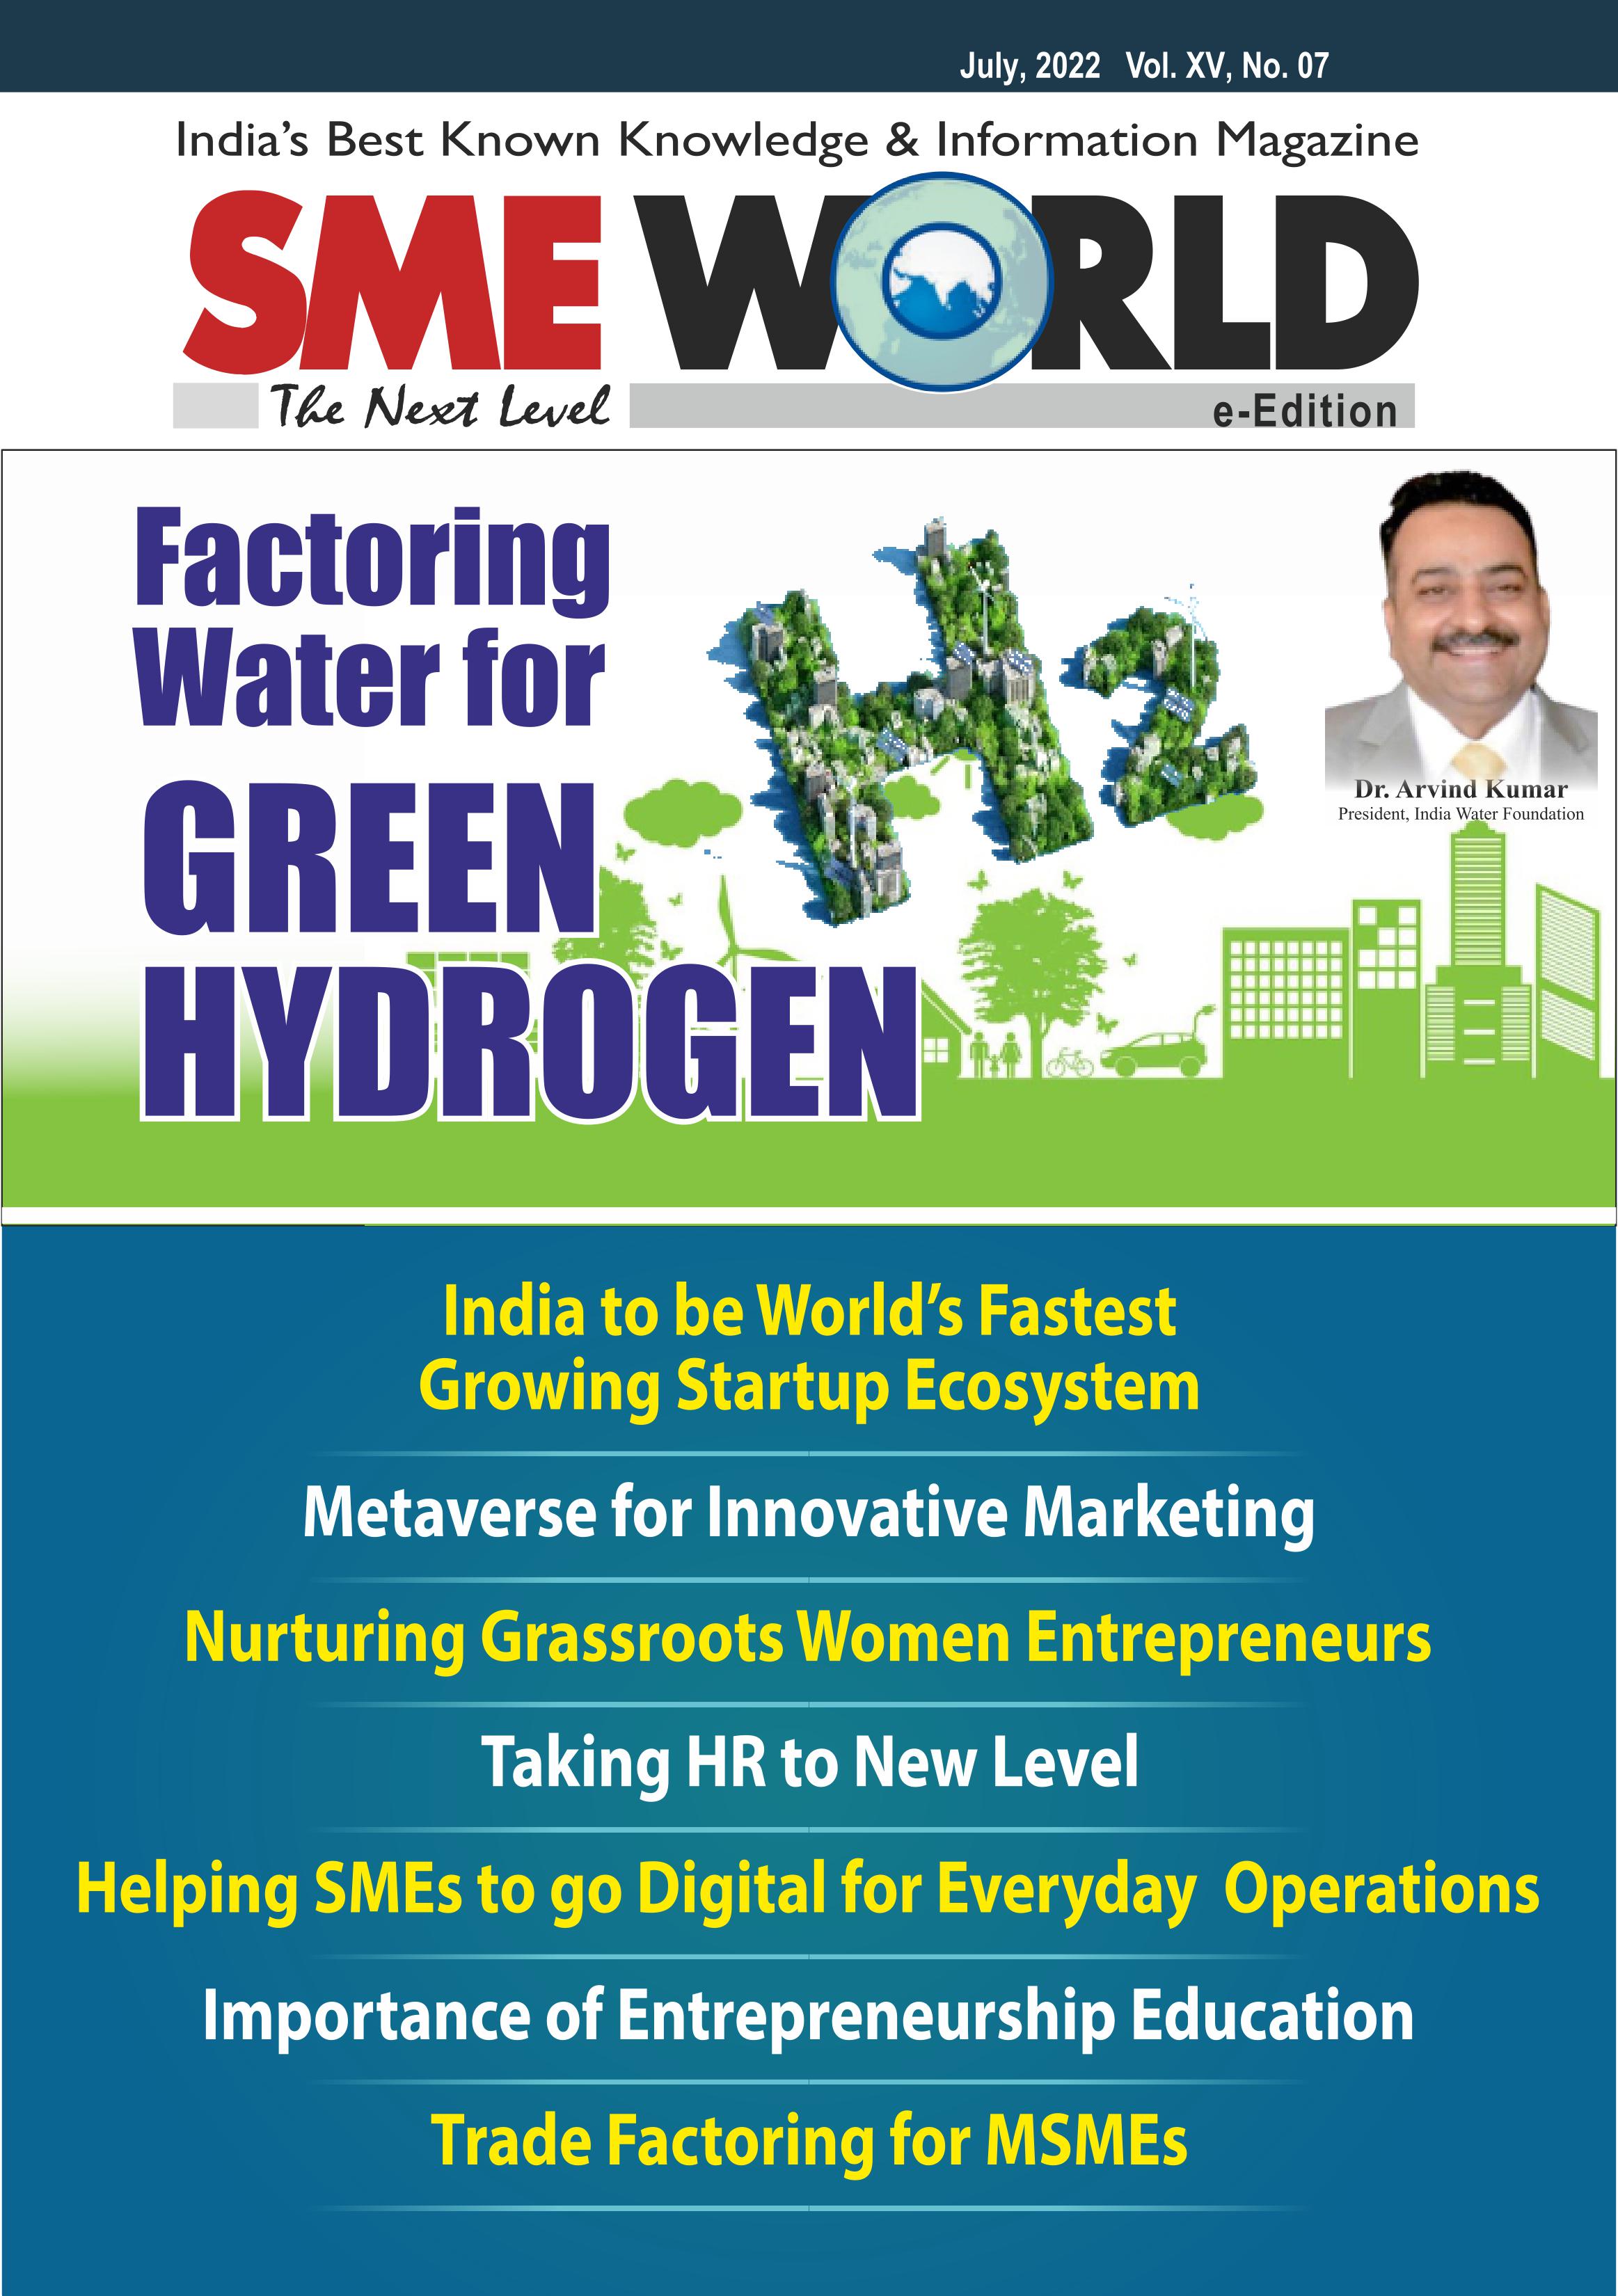 Dear Friends, India Water Foundation made the first official presentation for the Ministry of Petroleum and Natural Gas Govt of India, on 'Facto...